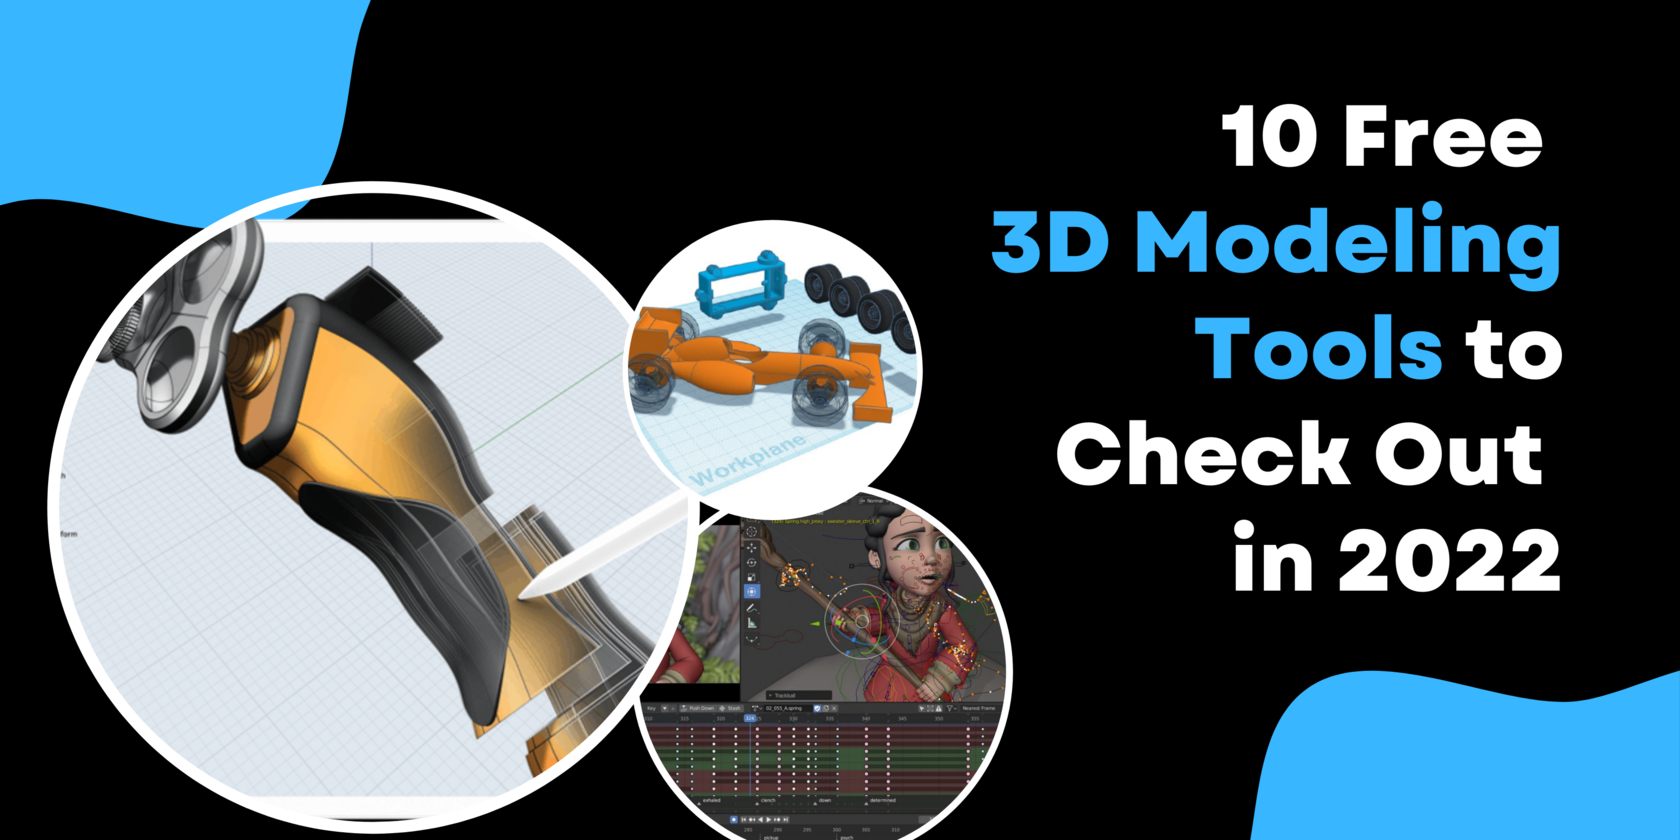 Best Free 3D Modeling Software to Check Out in 2022